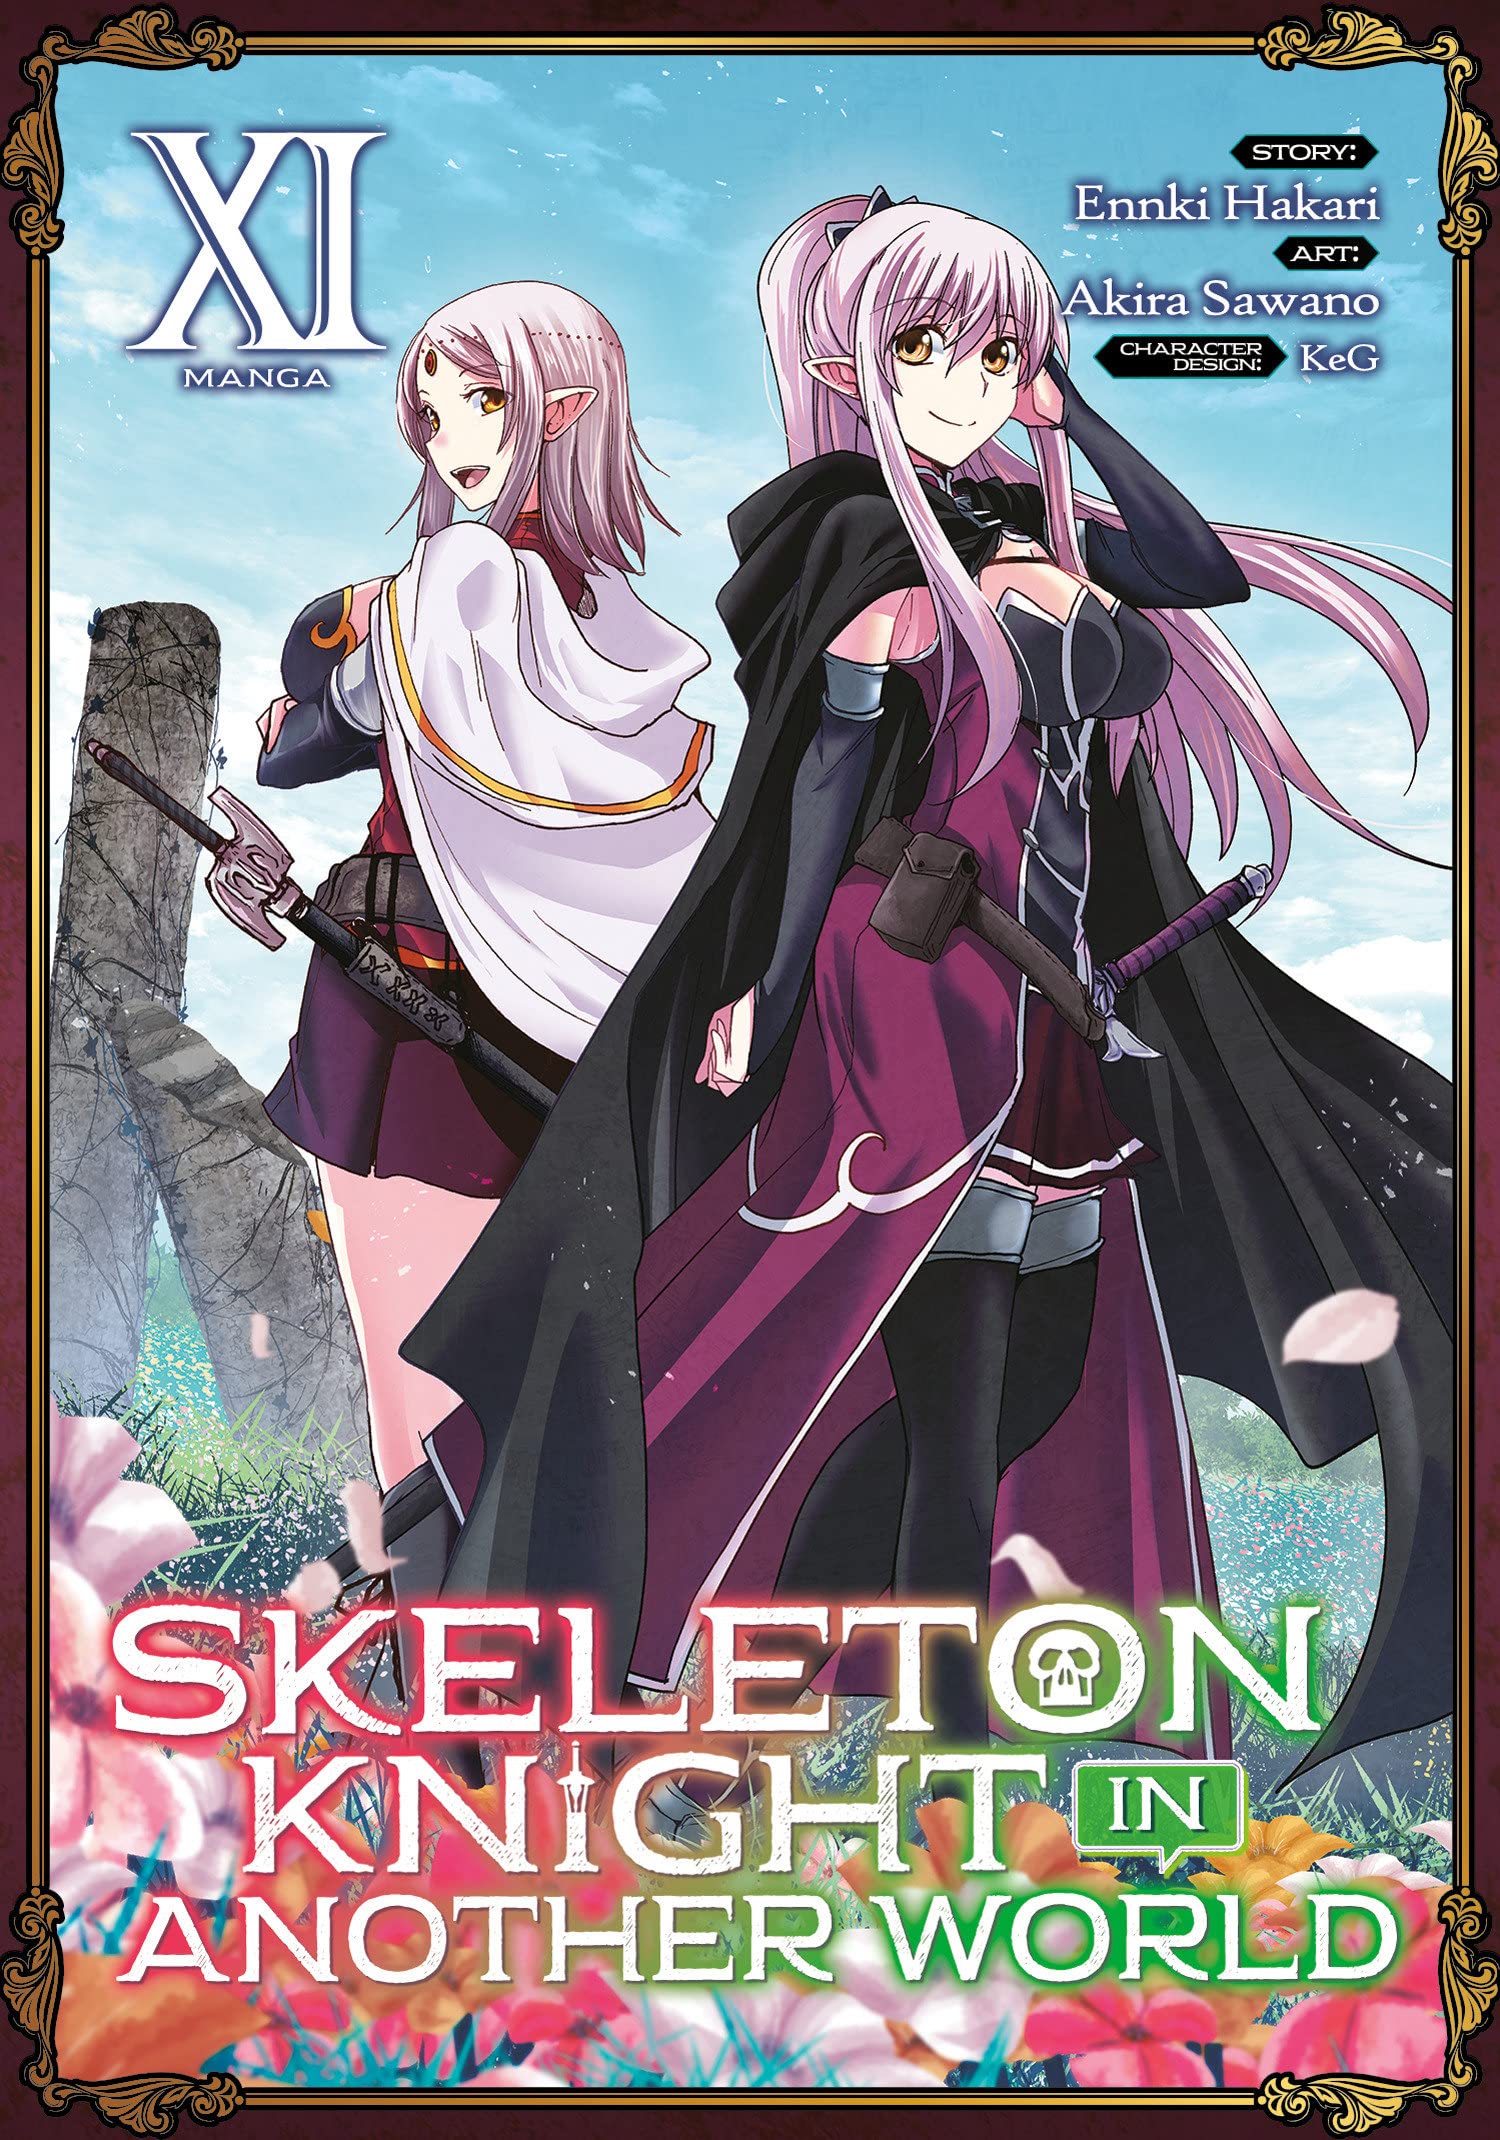 Skeleton Knight in Another World (Manga) Vol. 11